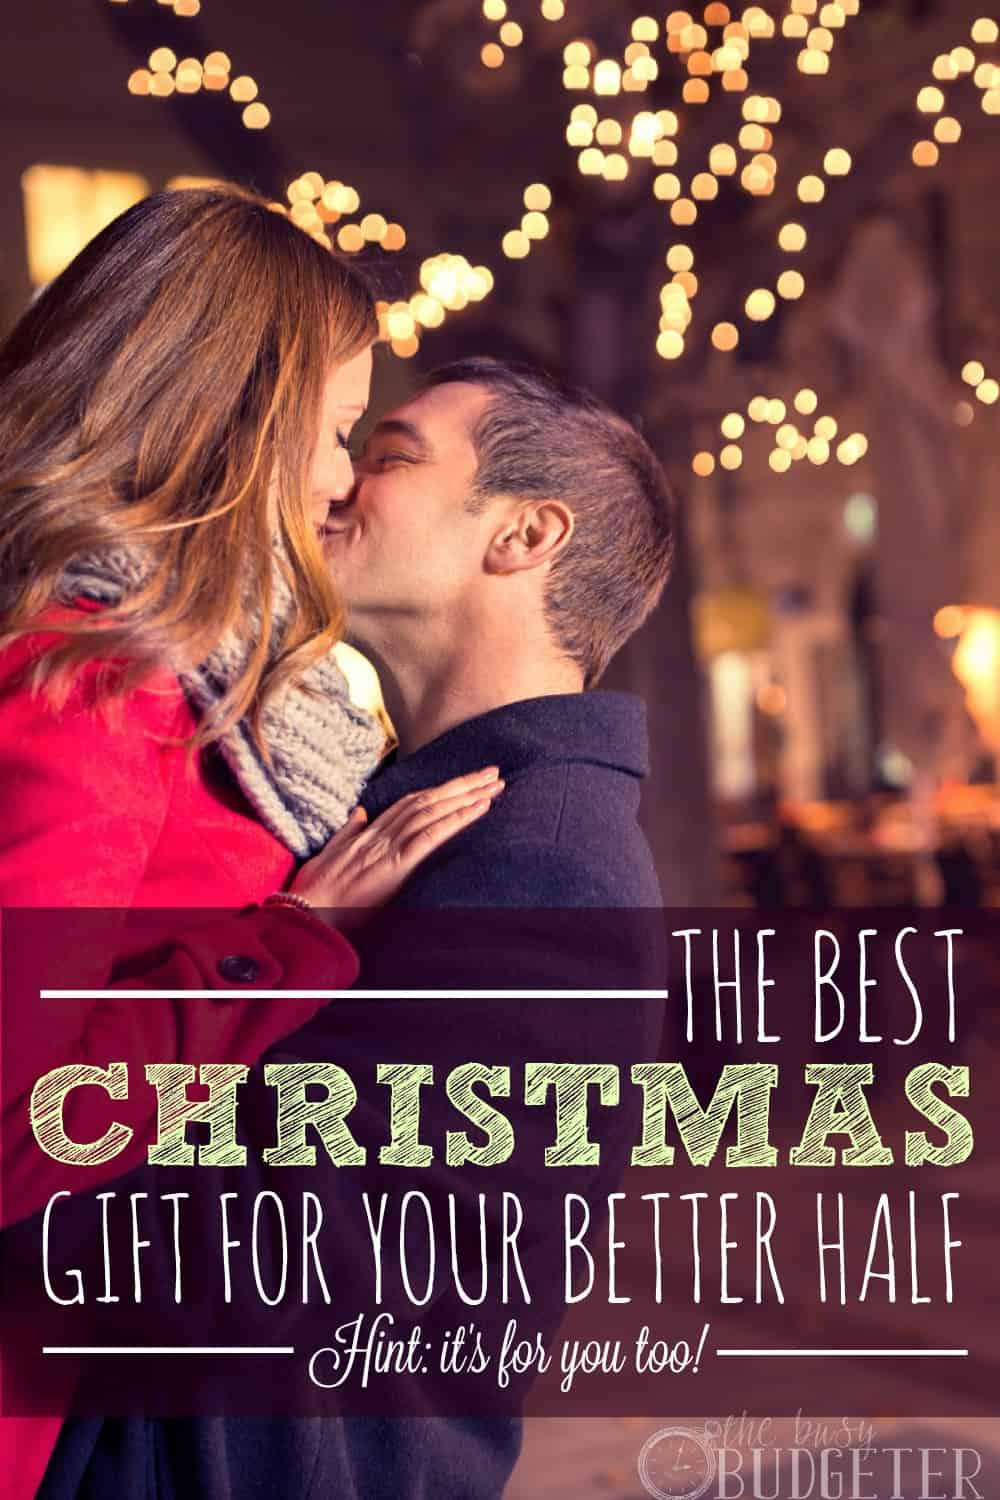 I love this idea for a unique Christmas gift for couples! I've totally been looking for the right thing to get my man and I think I found it!